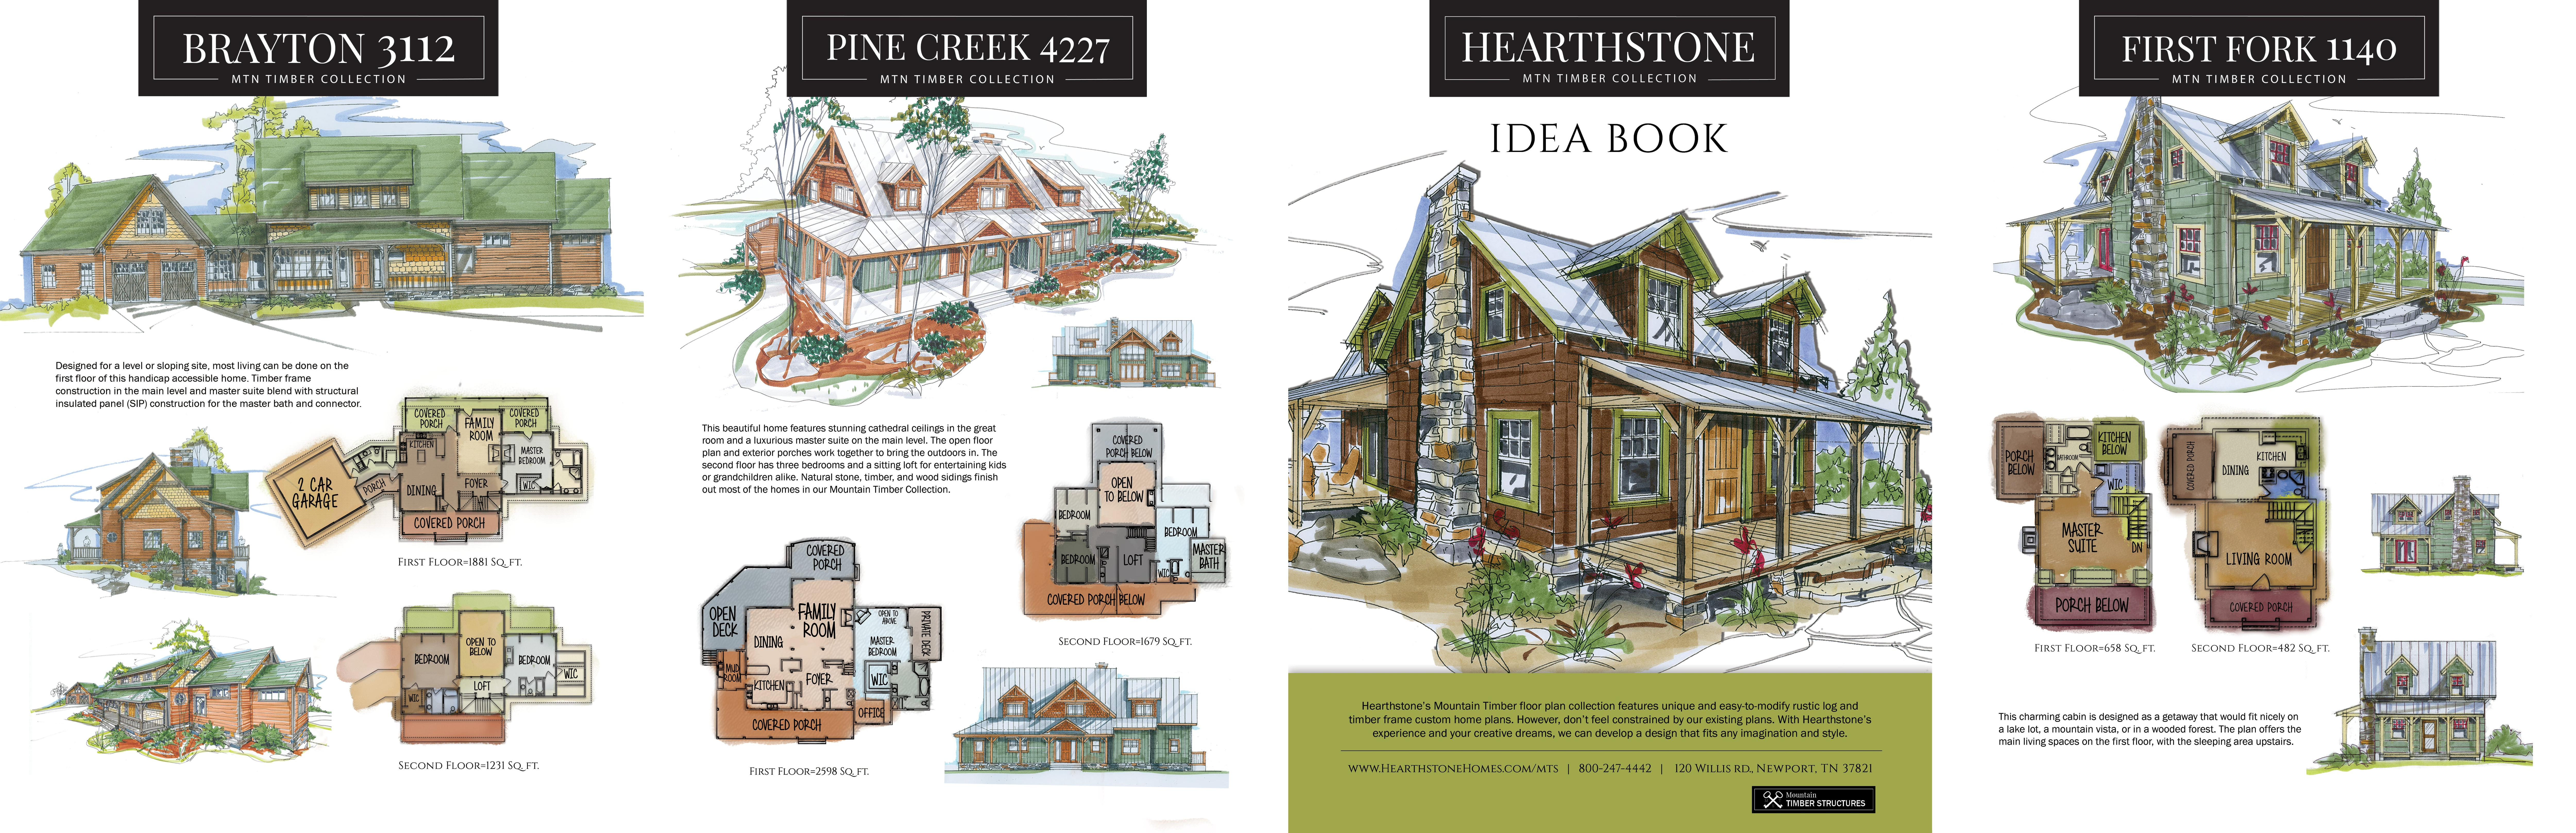 New Mountain Timber IDEA BOOK %title% %sep% Hearthstone Homes Mountain Timber Floor plan brochure32 Hearthstone Homes